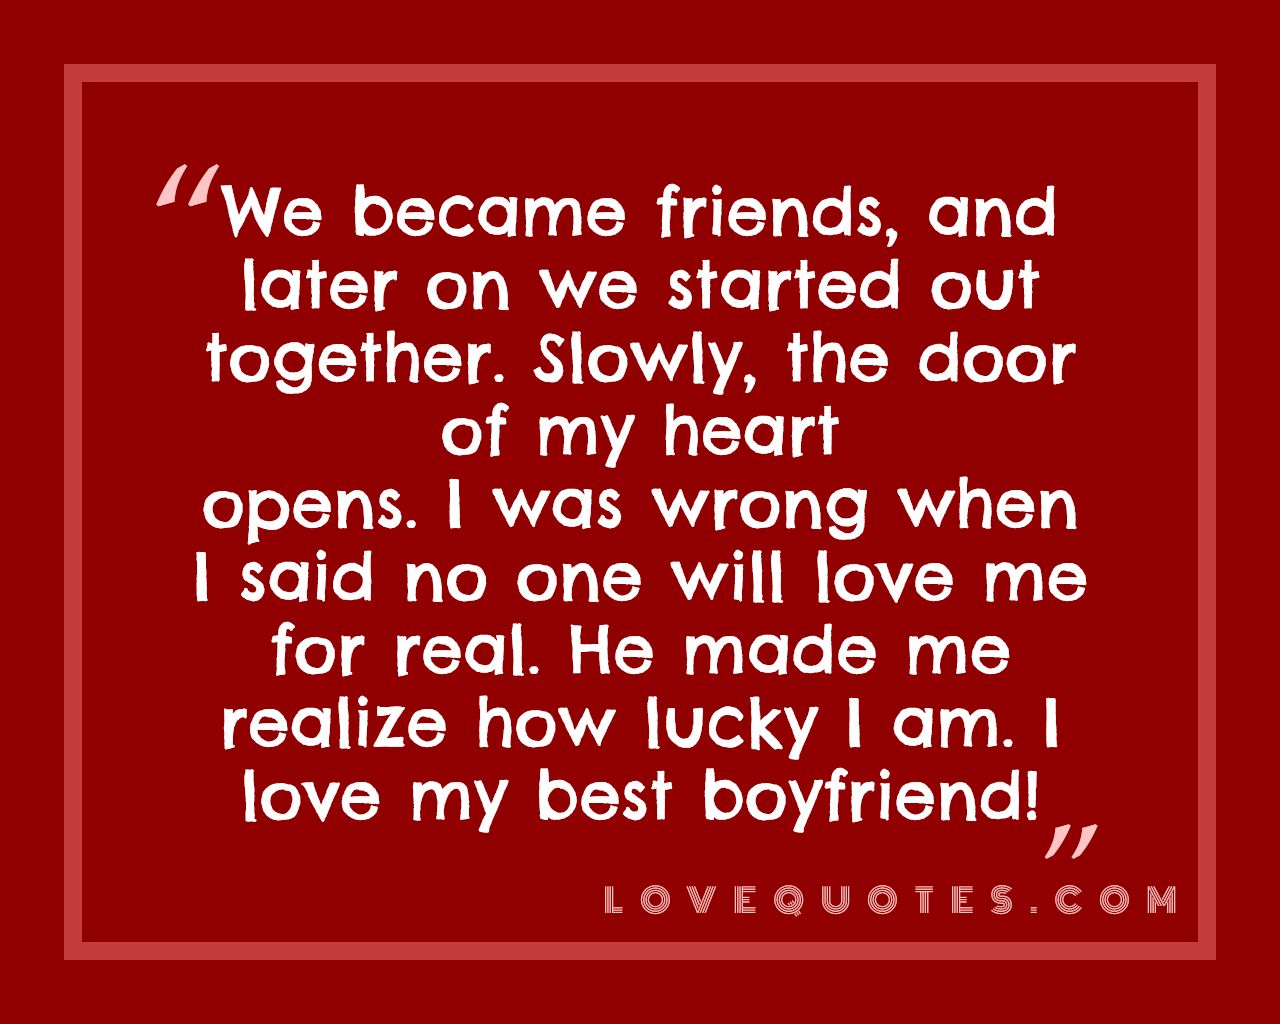 Love Me For Real - Love Quotes